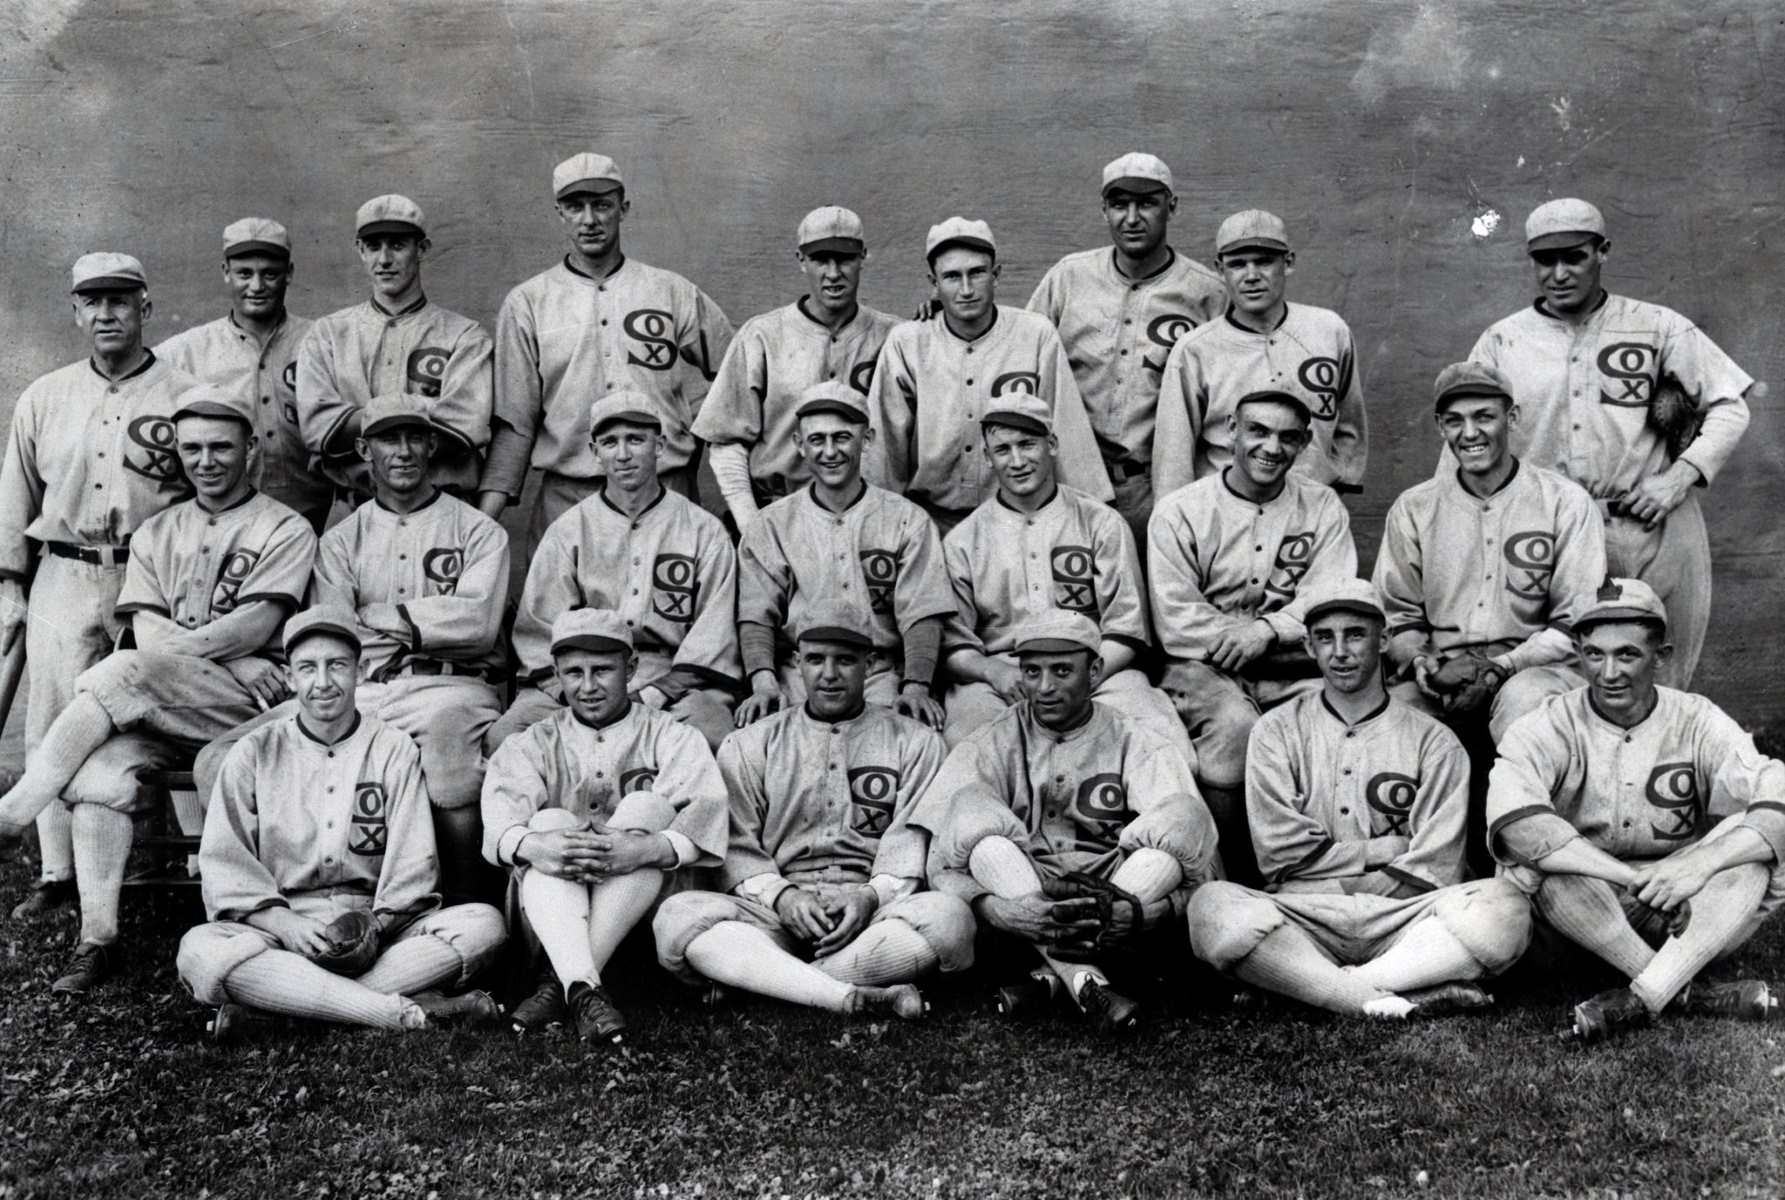 The Shocking Truth Behind The Chicago White Sox's Devastating Loss In The 1919 World Series